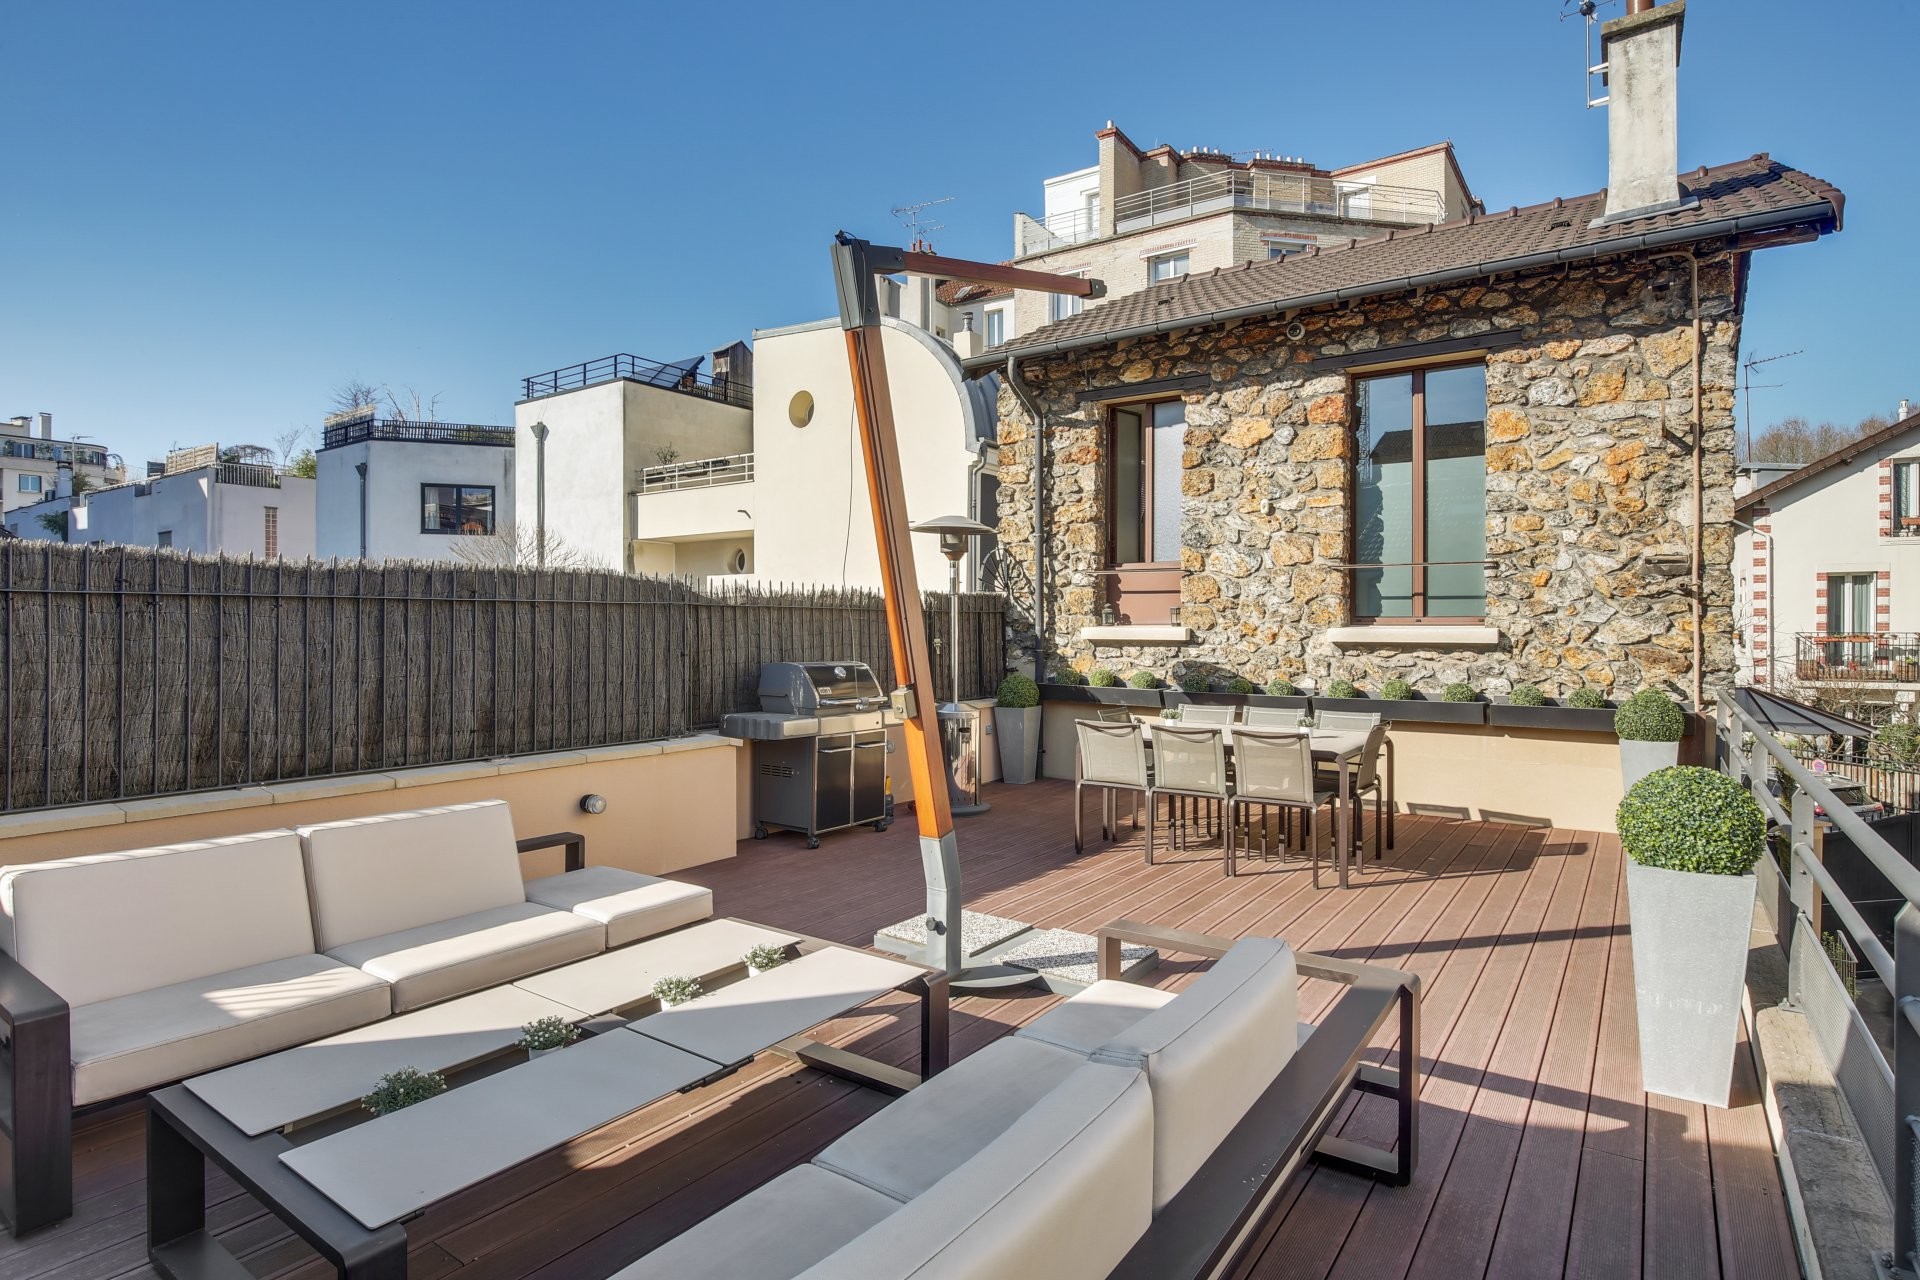 Home of the week - Boulogne-Billancourt